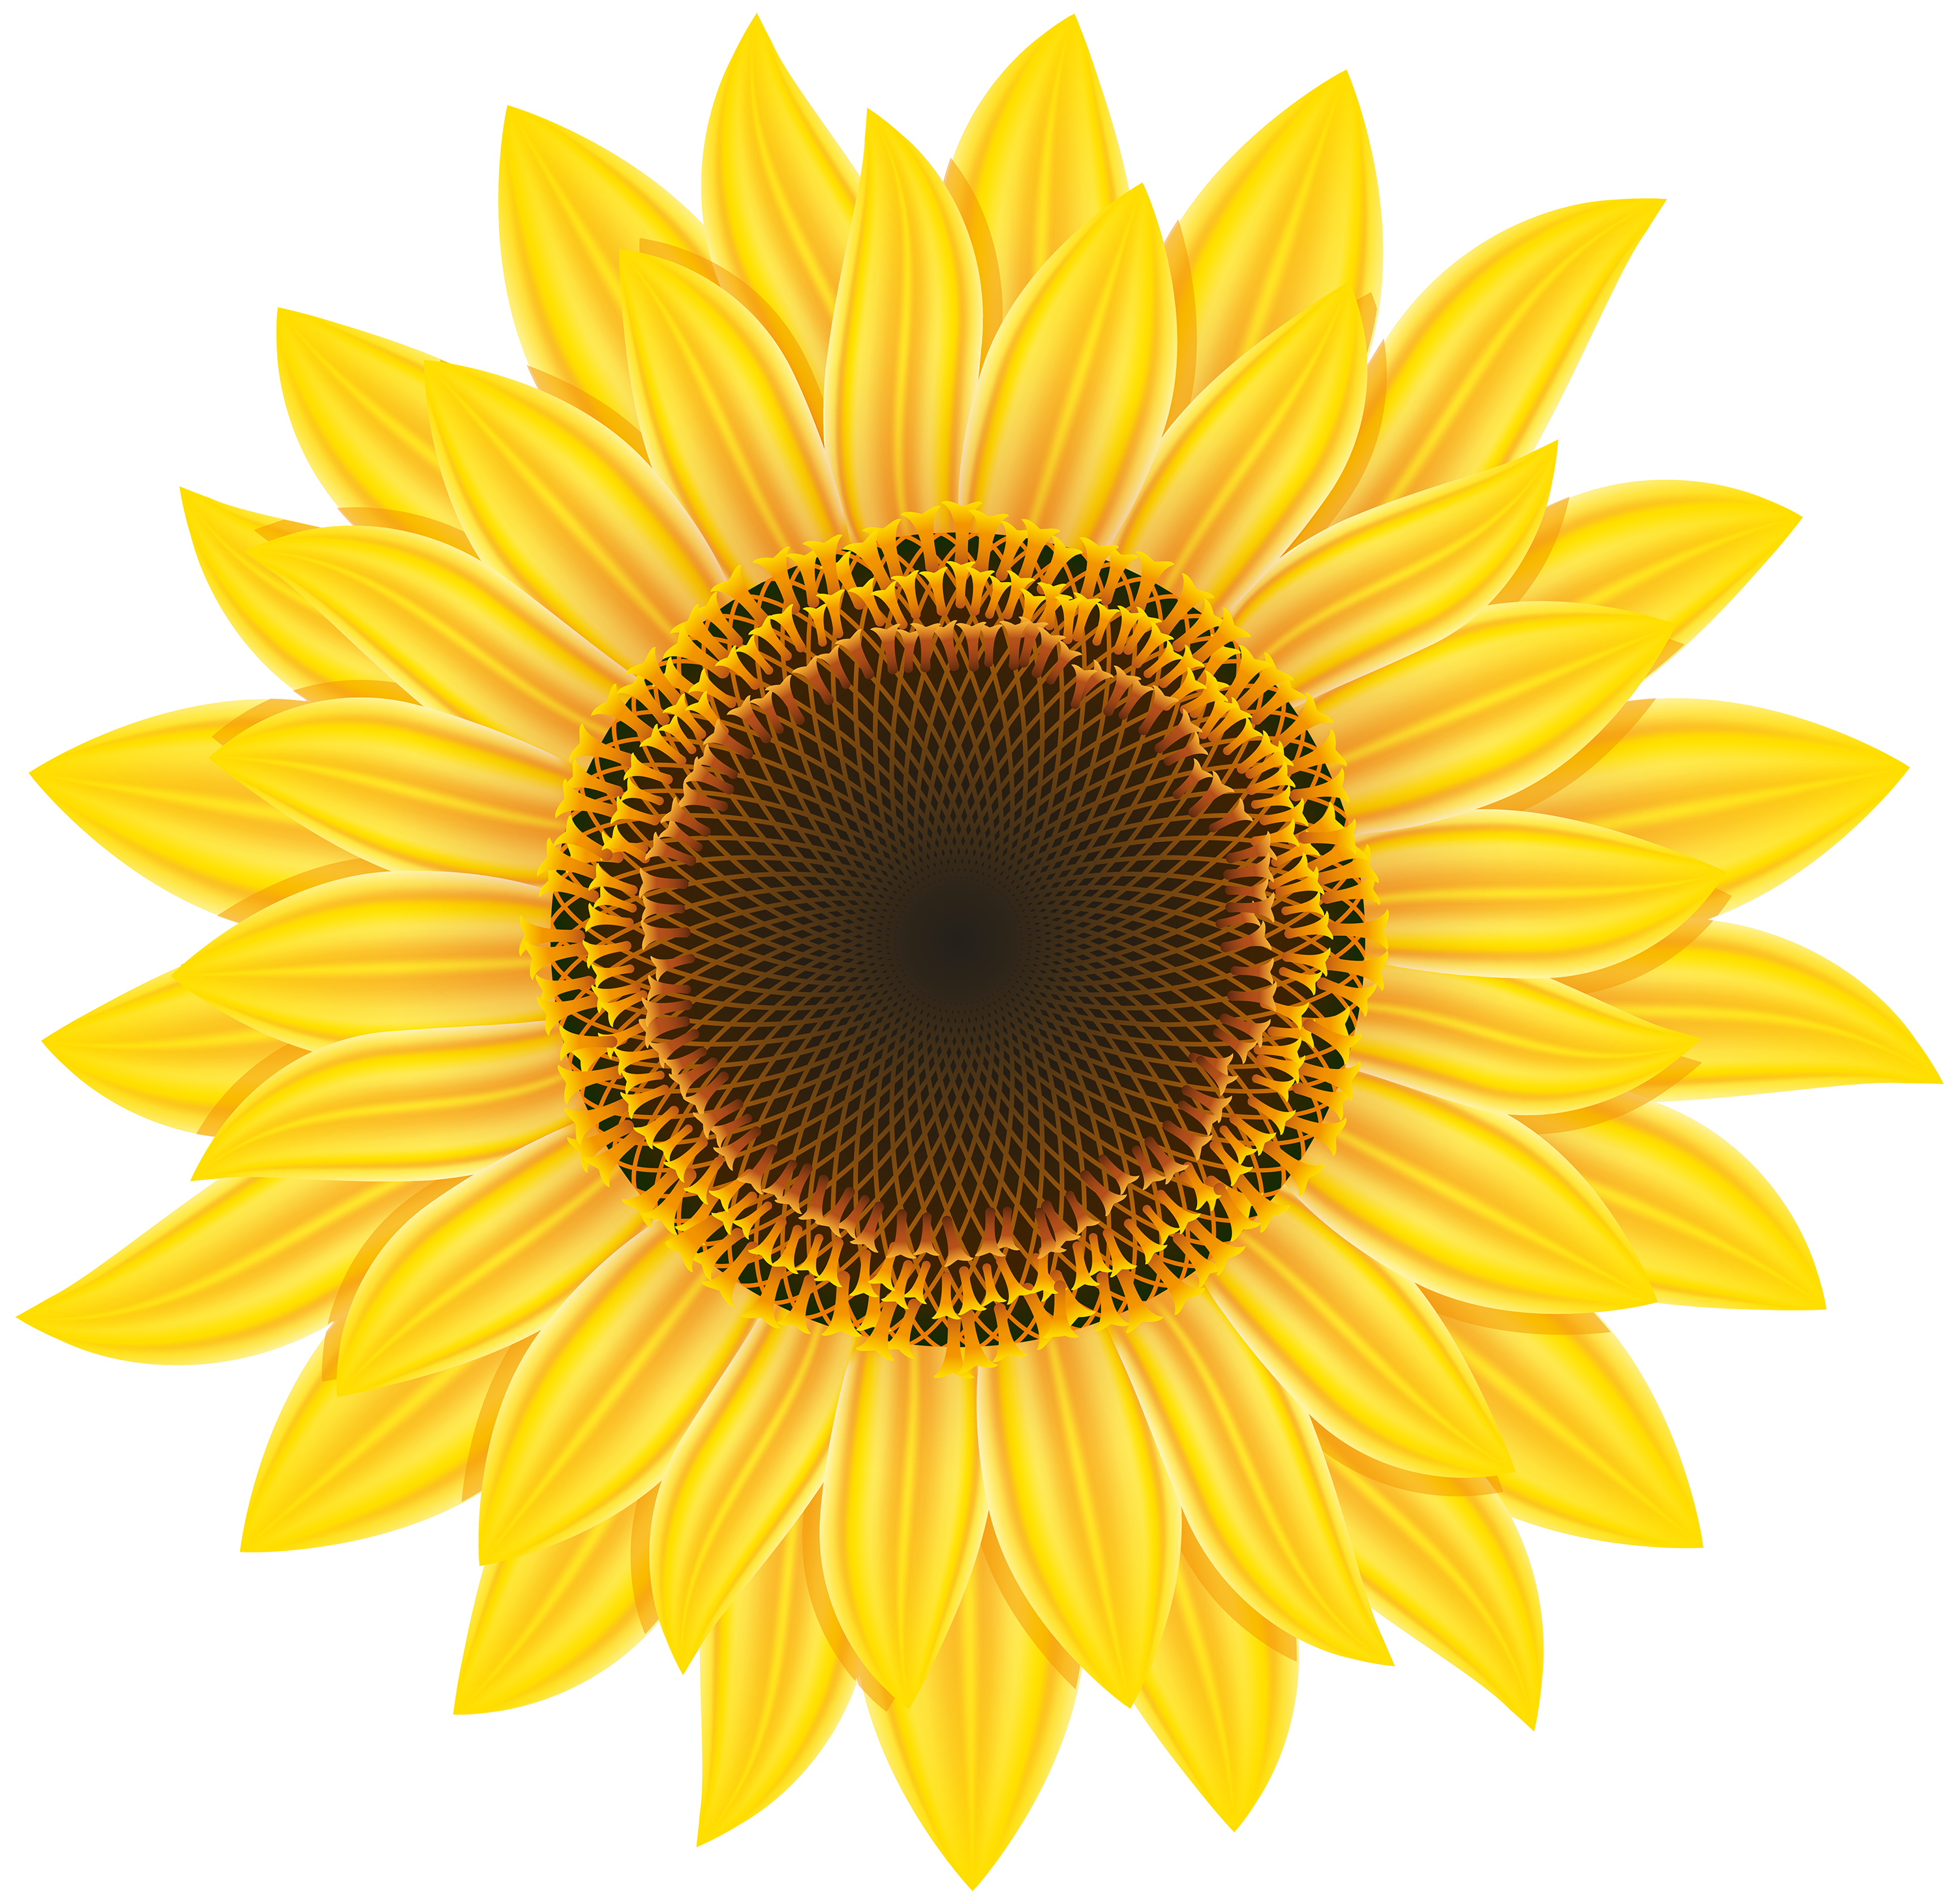 Flower clipart sunflower. Png images free download